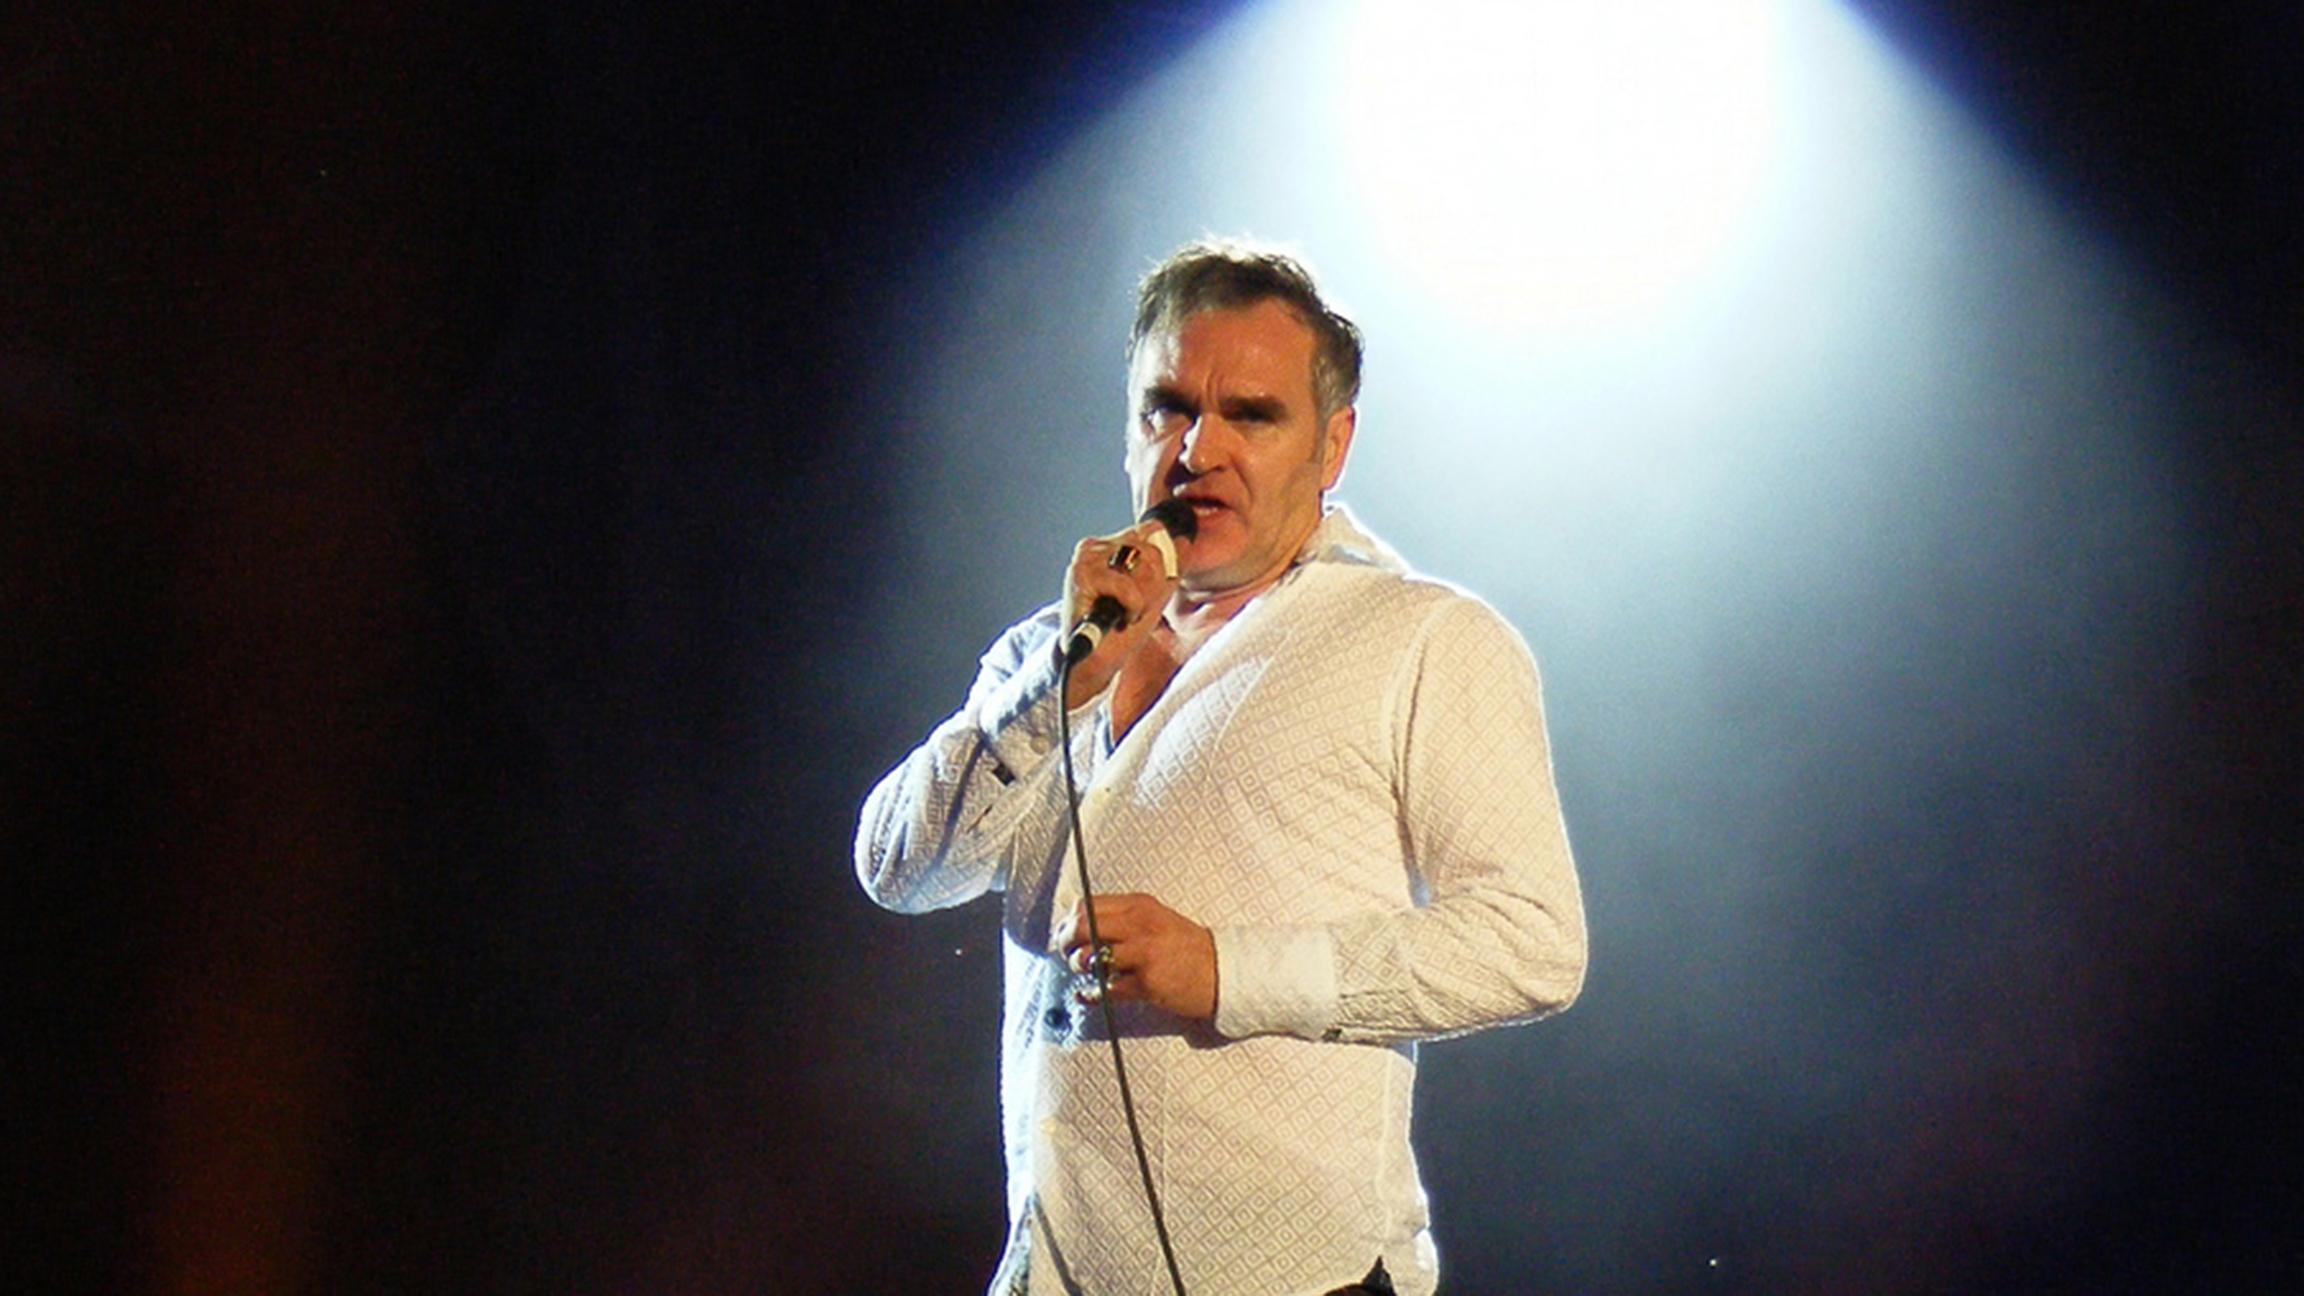 This charming man: Morrissey is scheduled to appear at Riot Fest on Saturday night. (Man Alive! / Flickr)